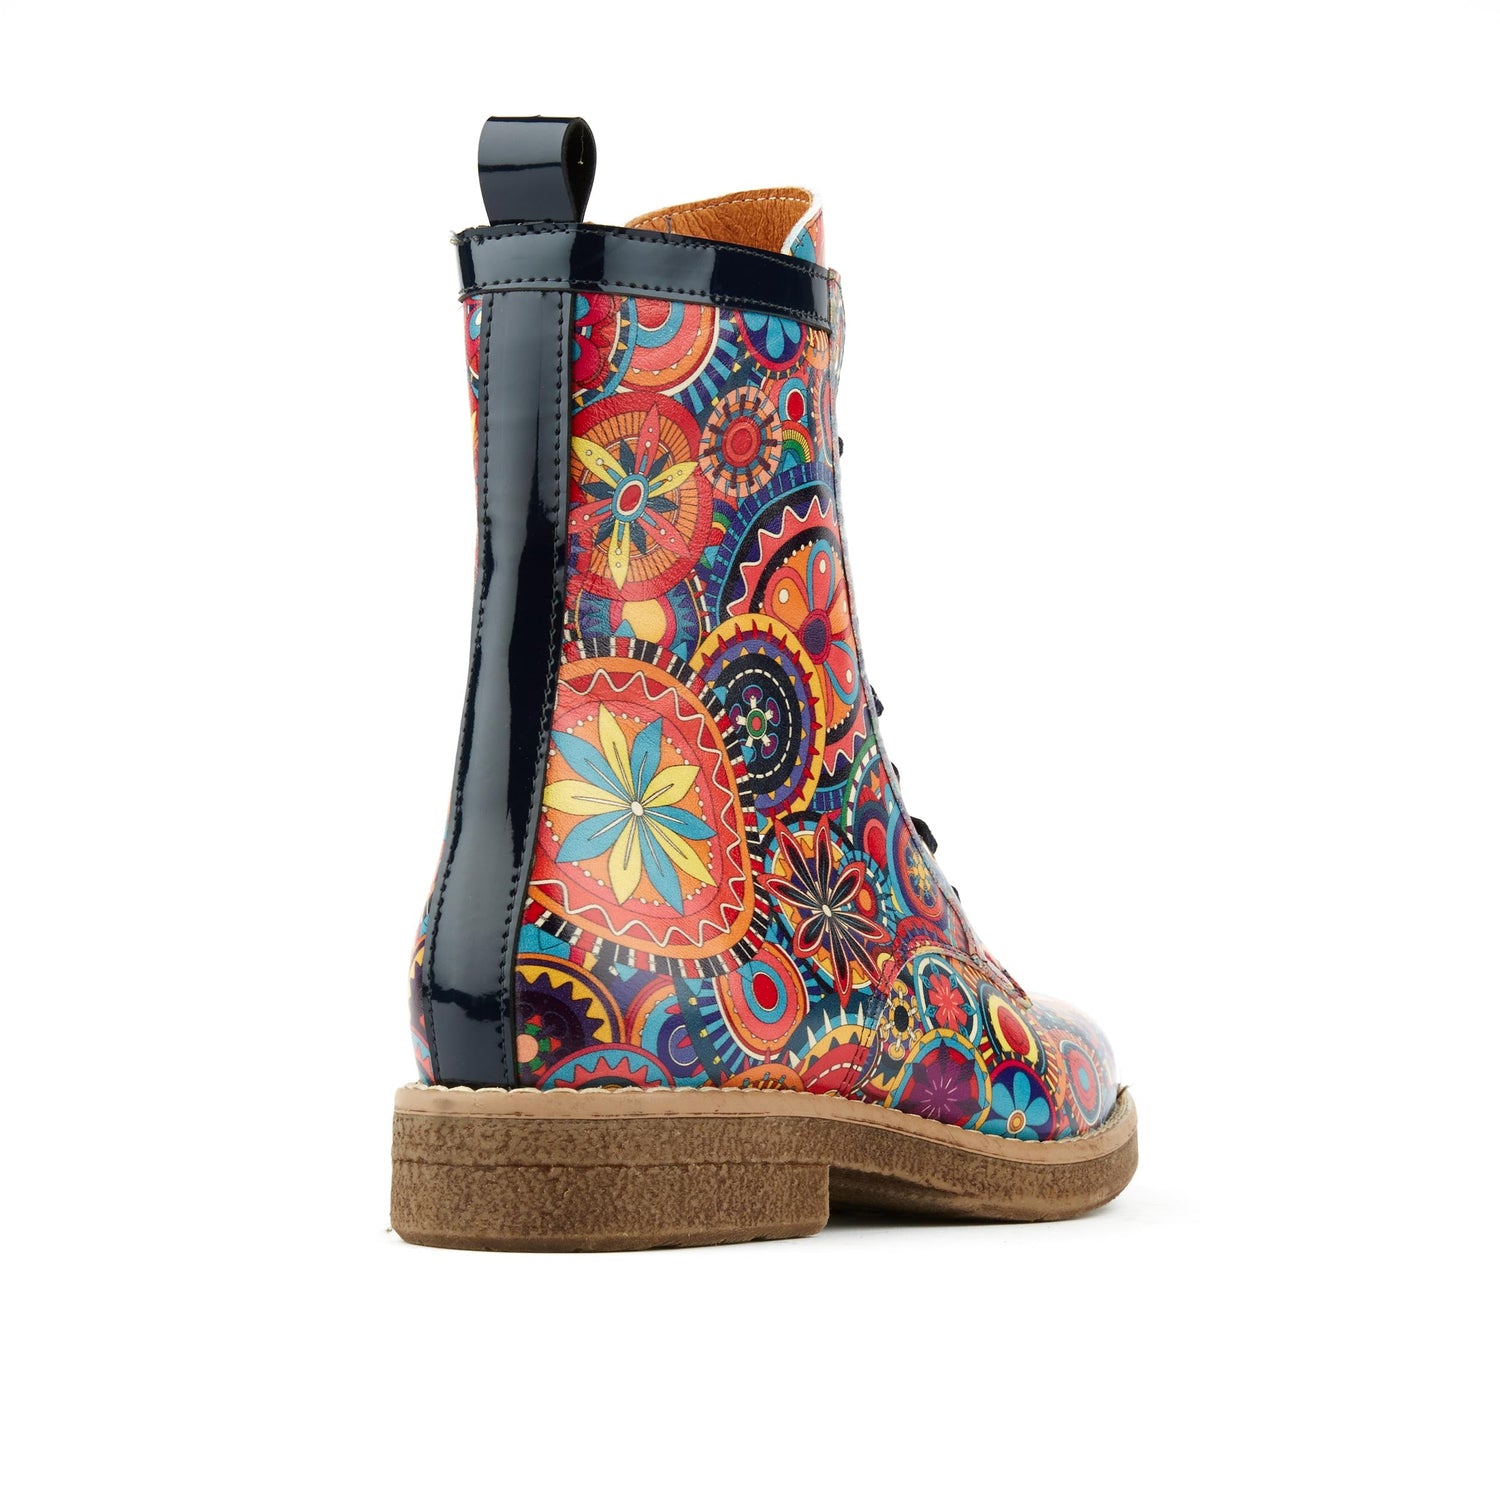 Traveller - New Signature Print Ankle Boots Embassy London 